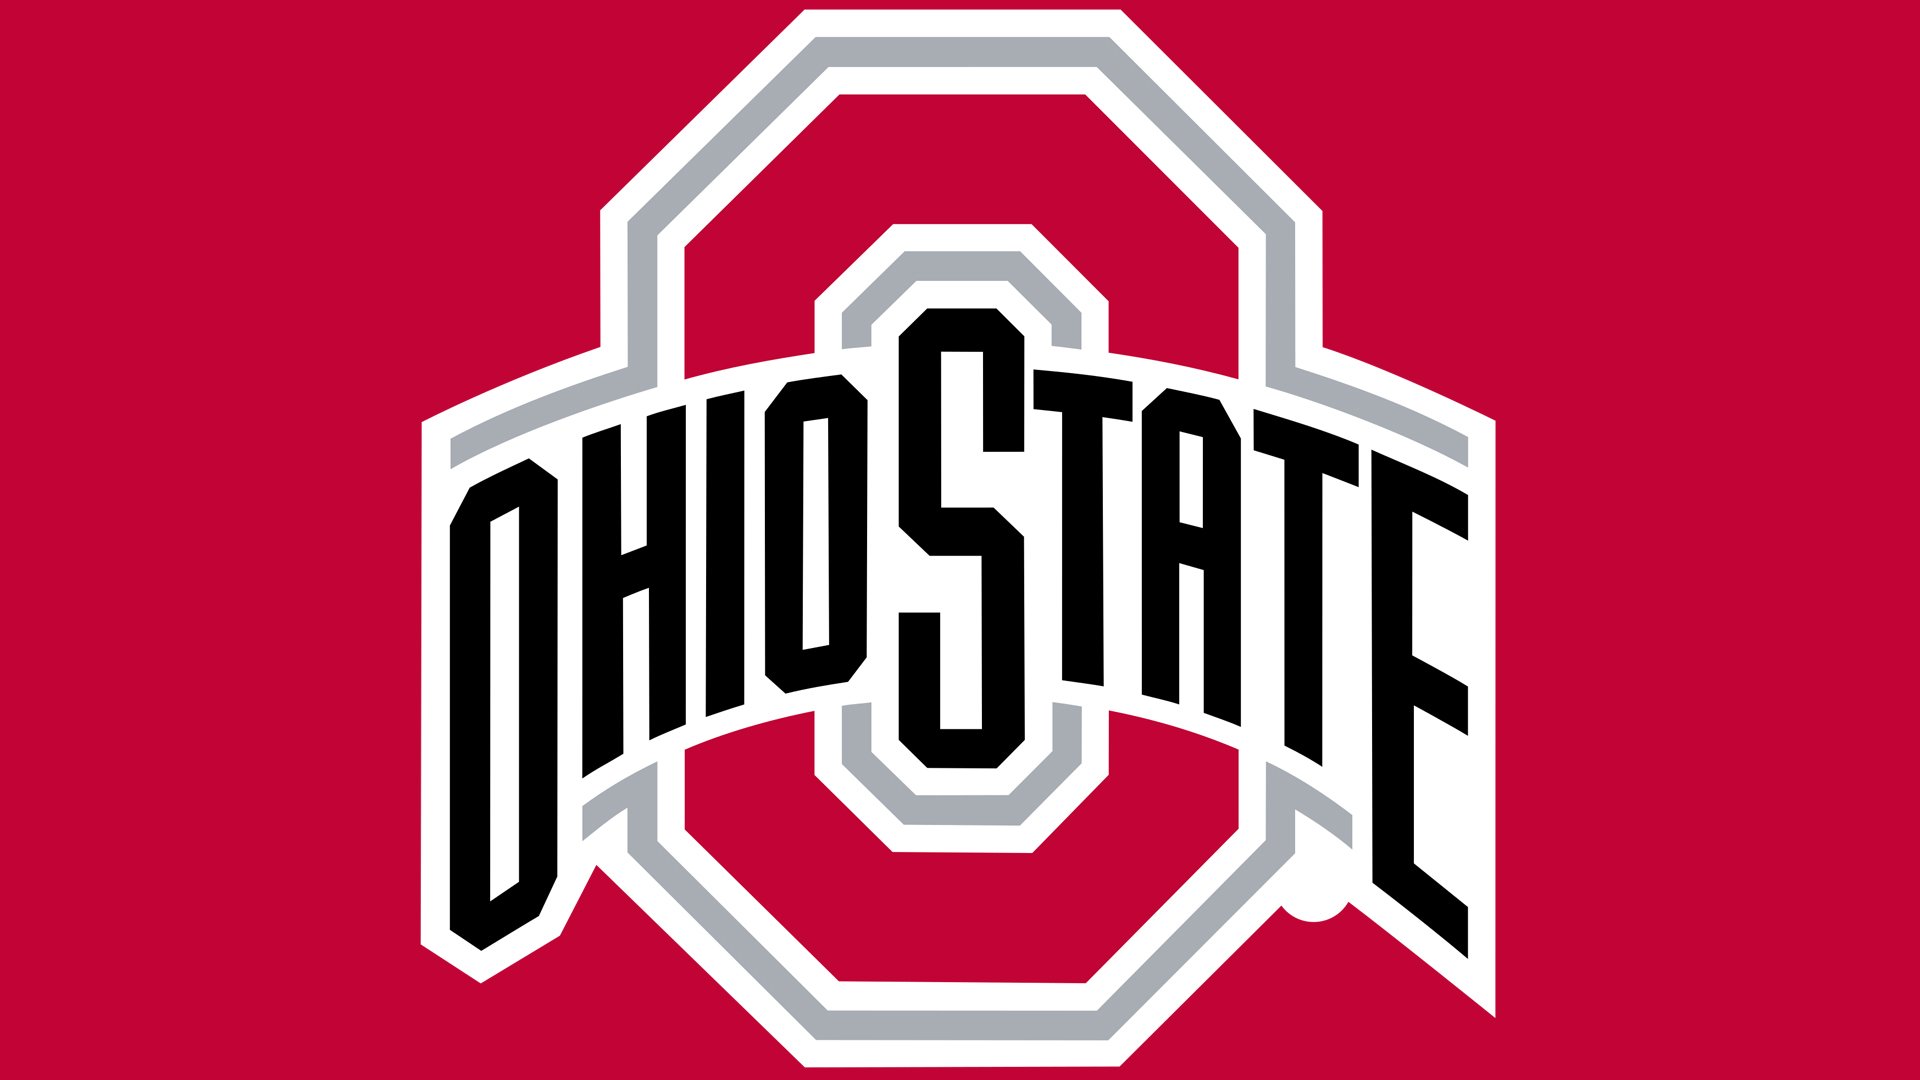 Ohio State Logo, Ohio State Symbol, Meaning, History and Evolution